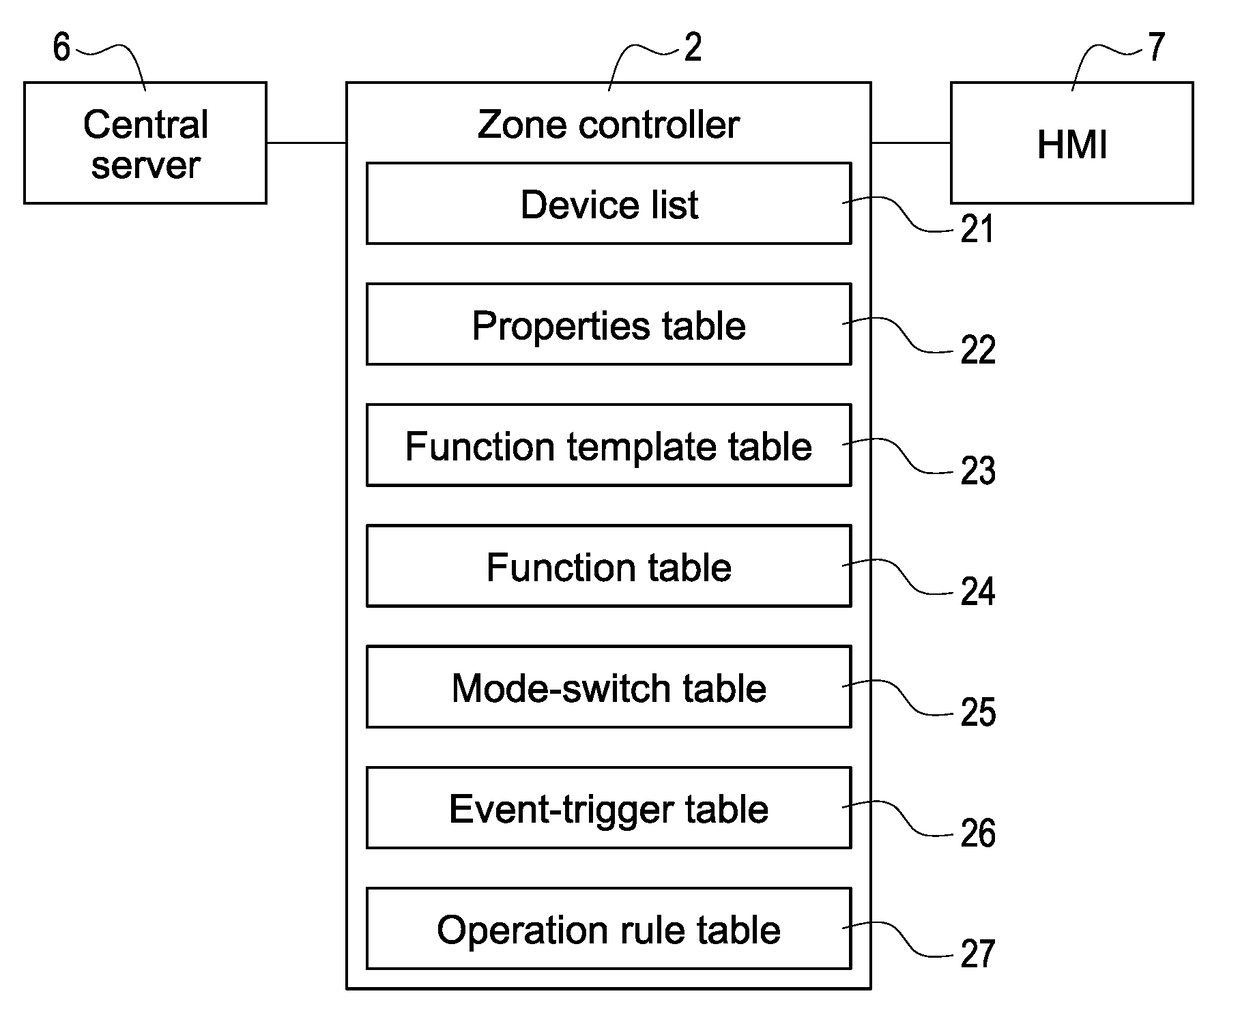 Automatic control method for zone controller